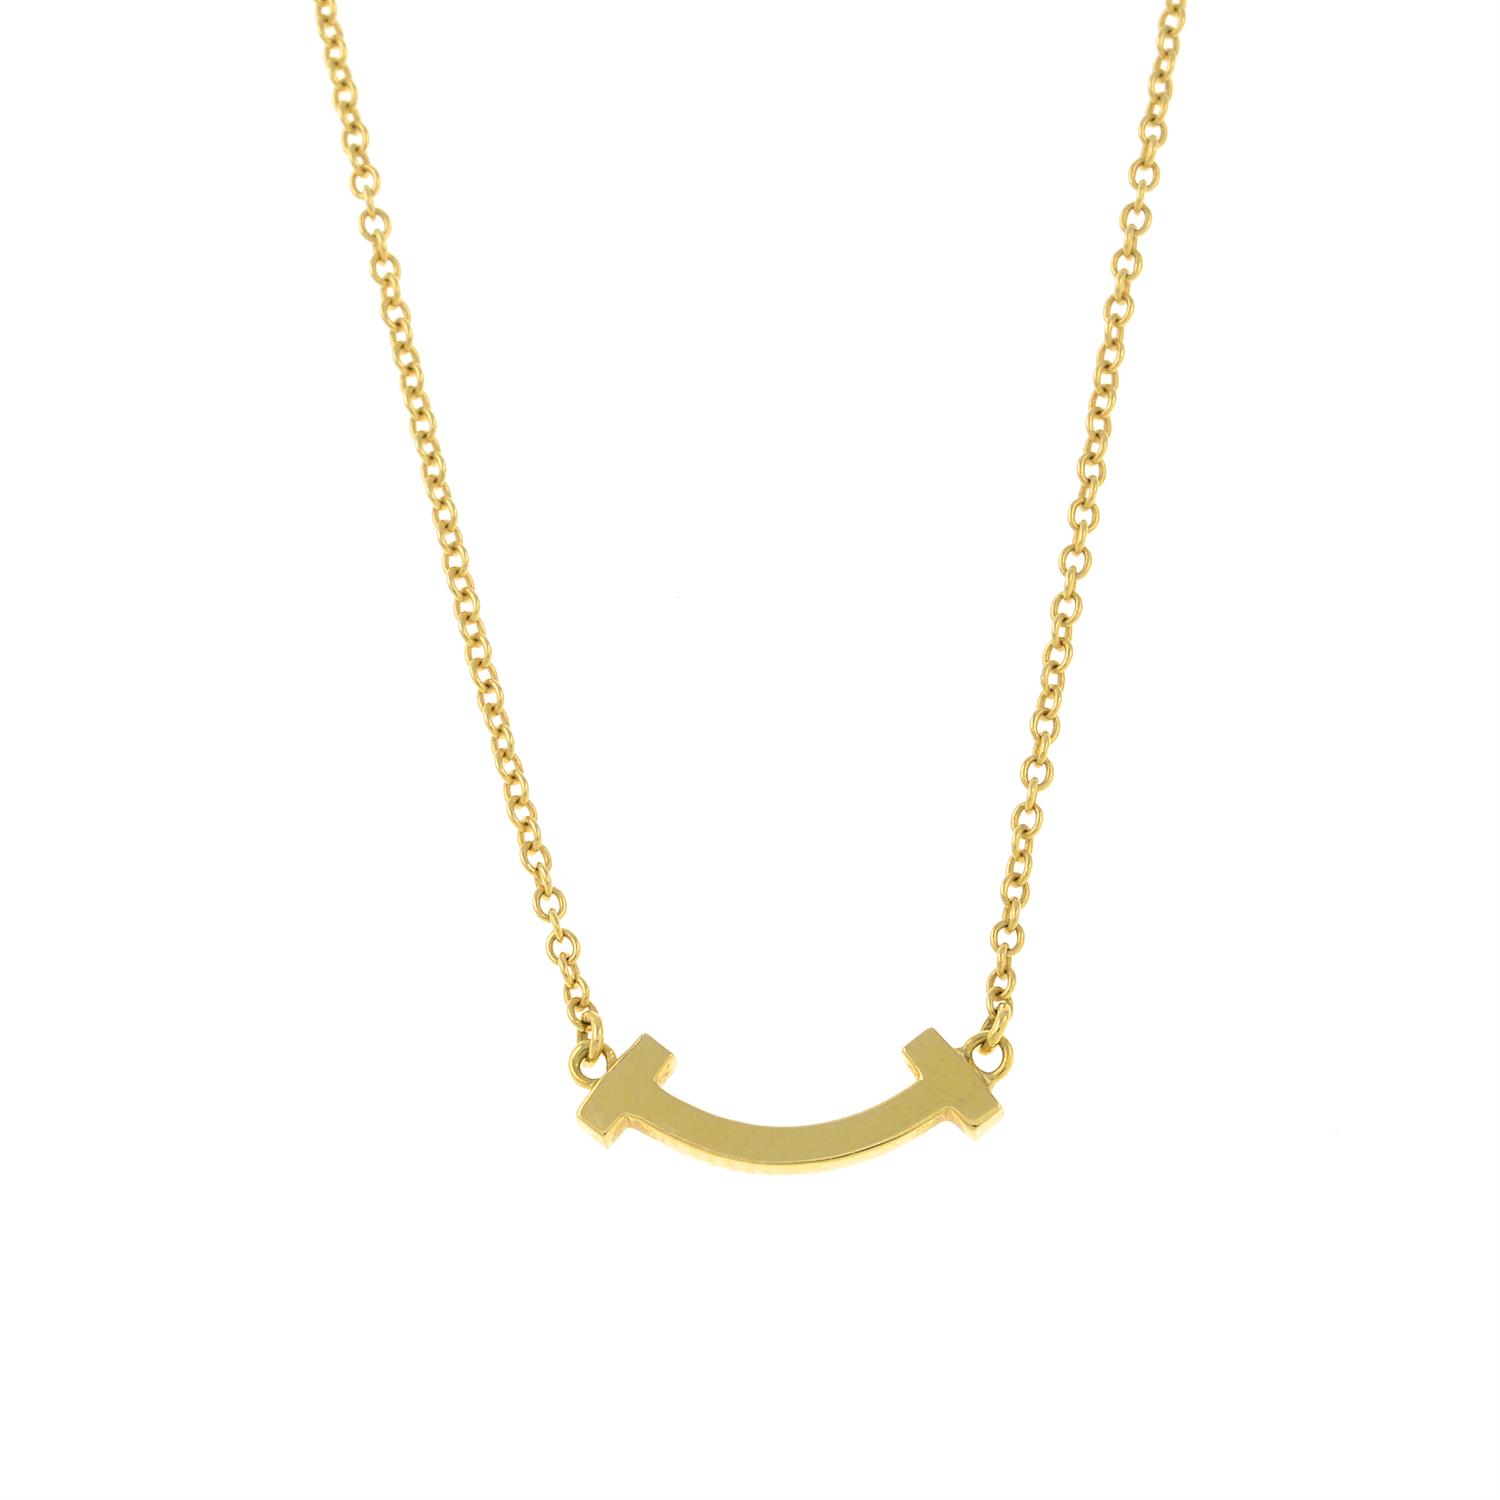 A pave-set diamond 'Tiffany T' Smile pendant, with chain, by Tiffany & Co. - Bild 2 aus 3